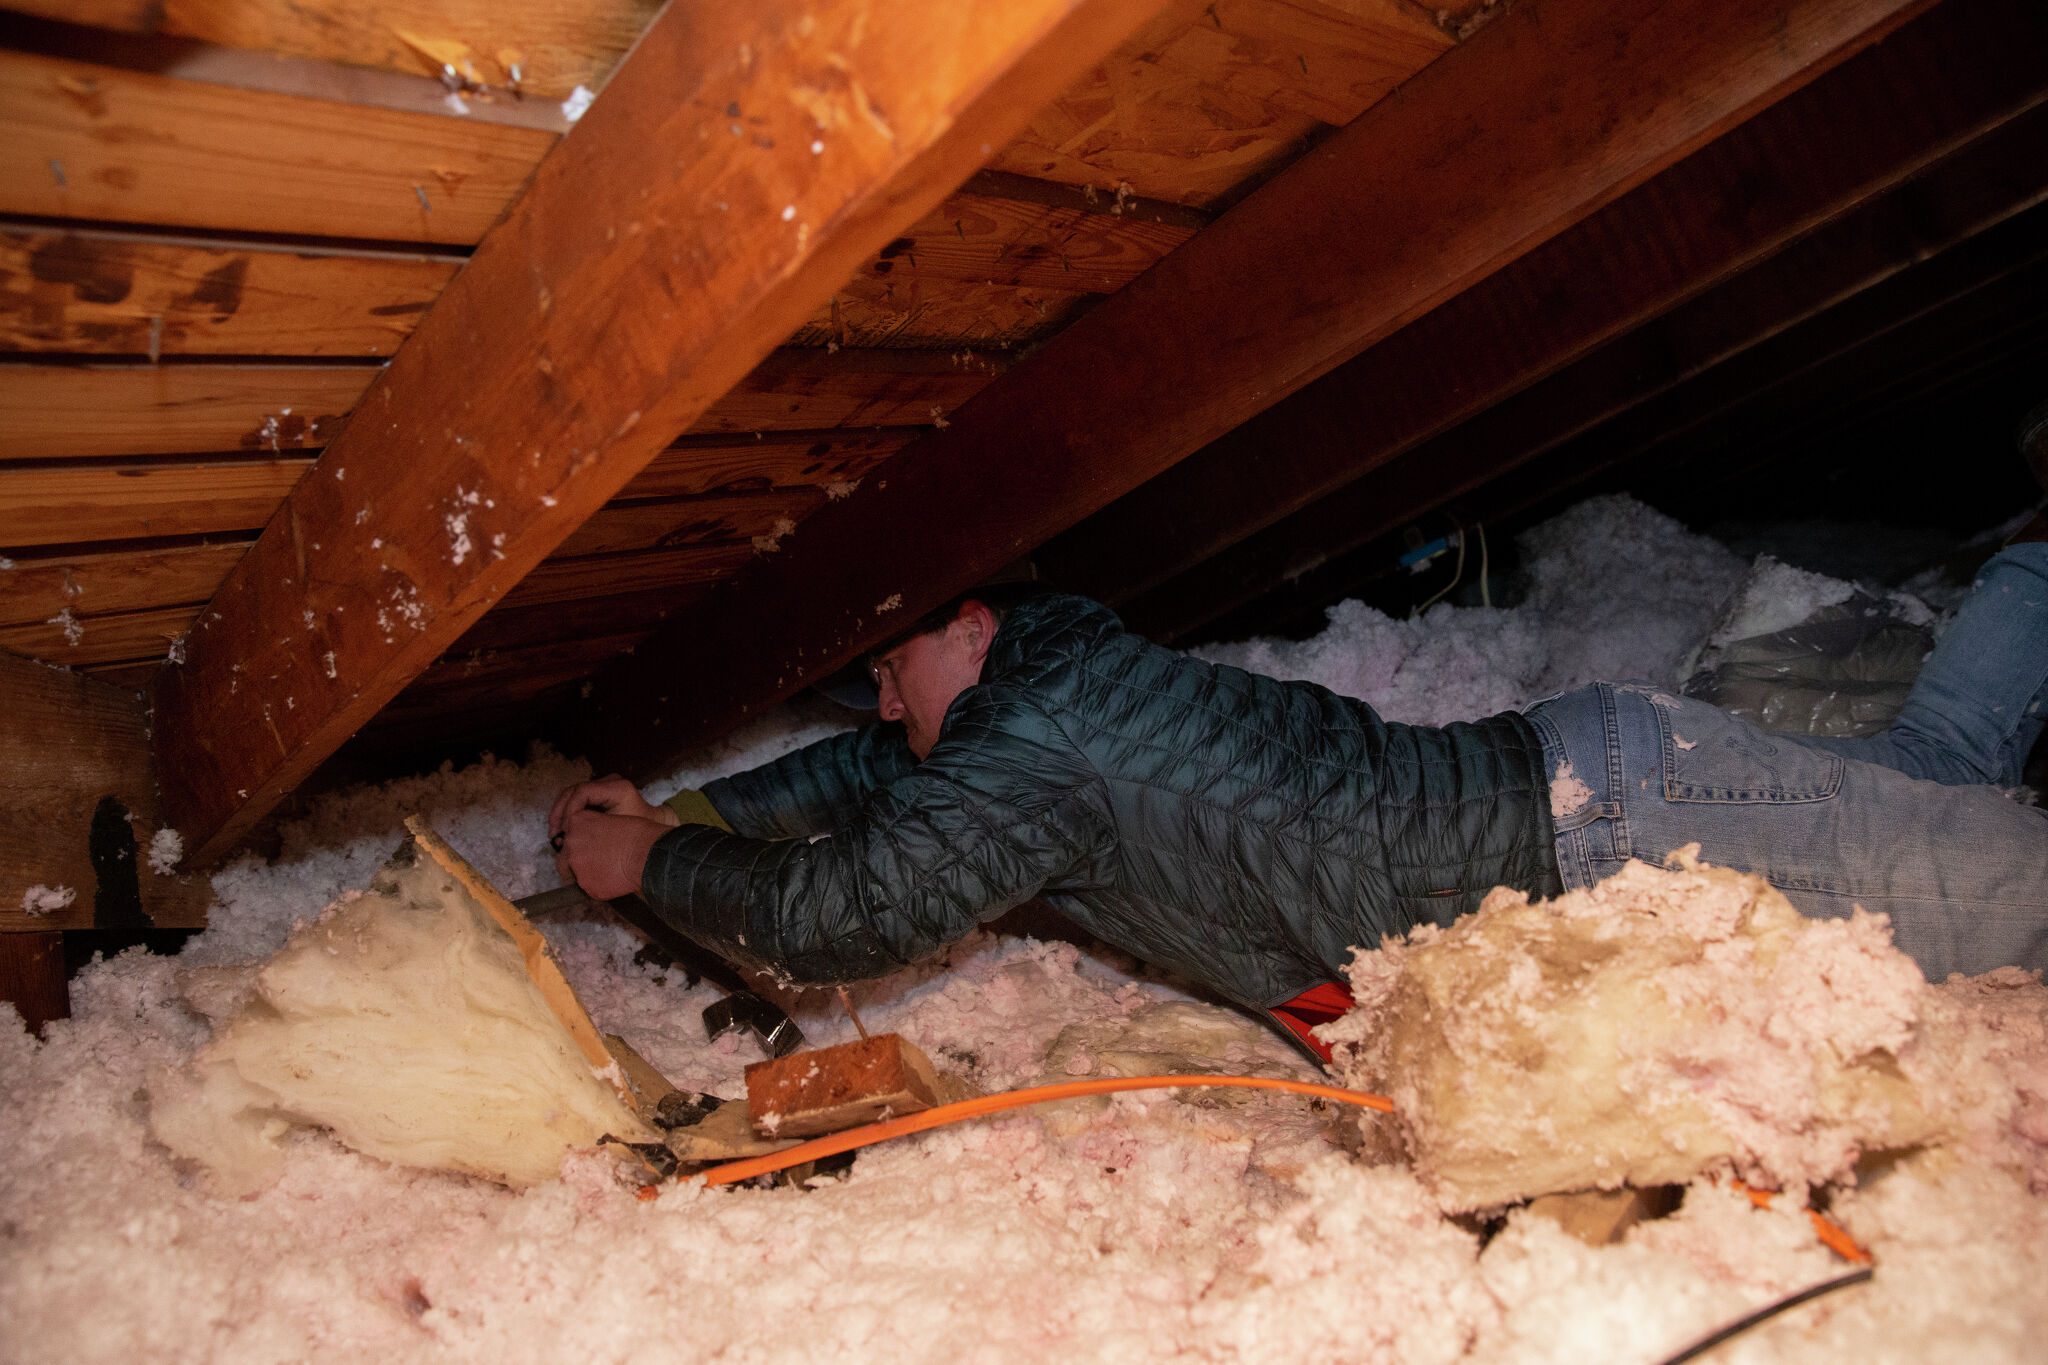 How to Insulate Attic Pipes